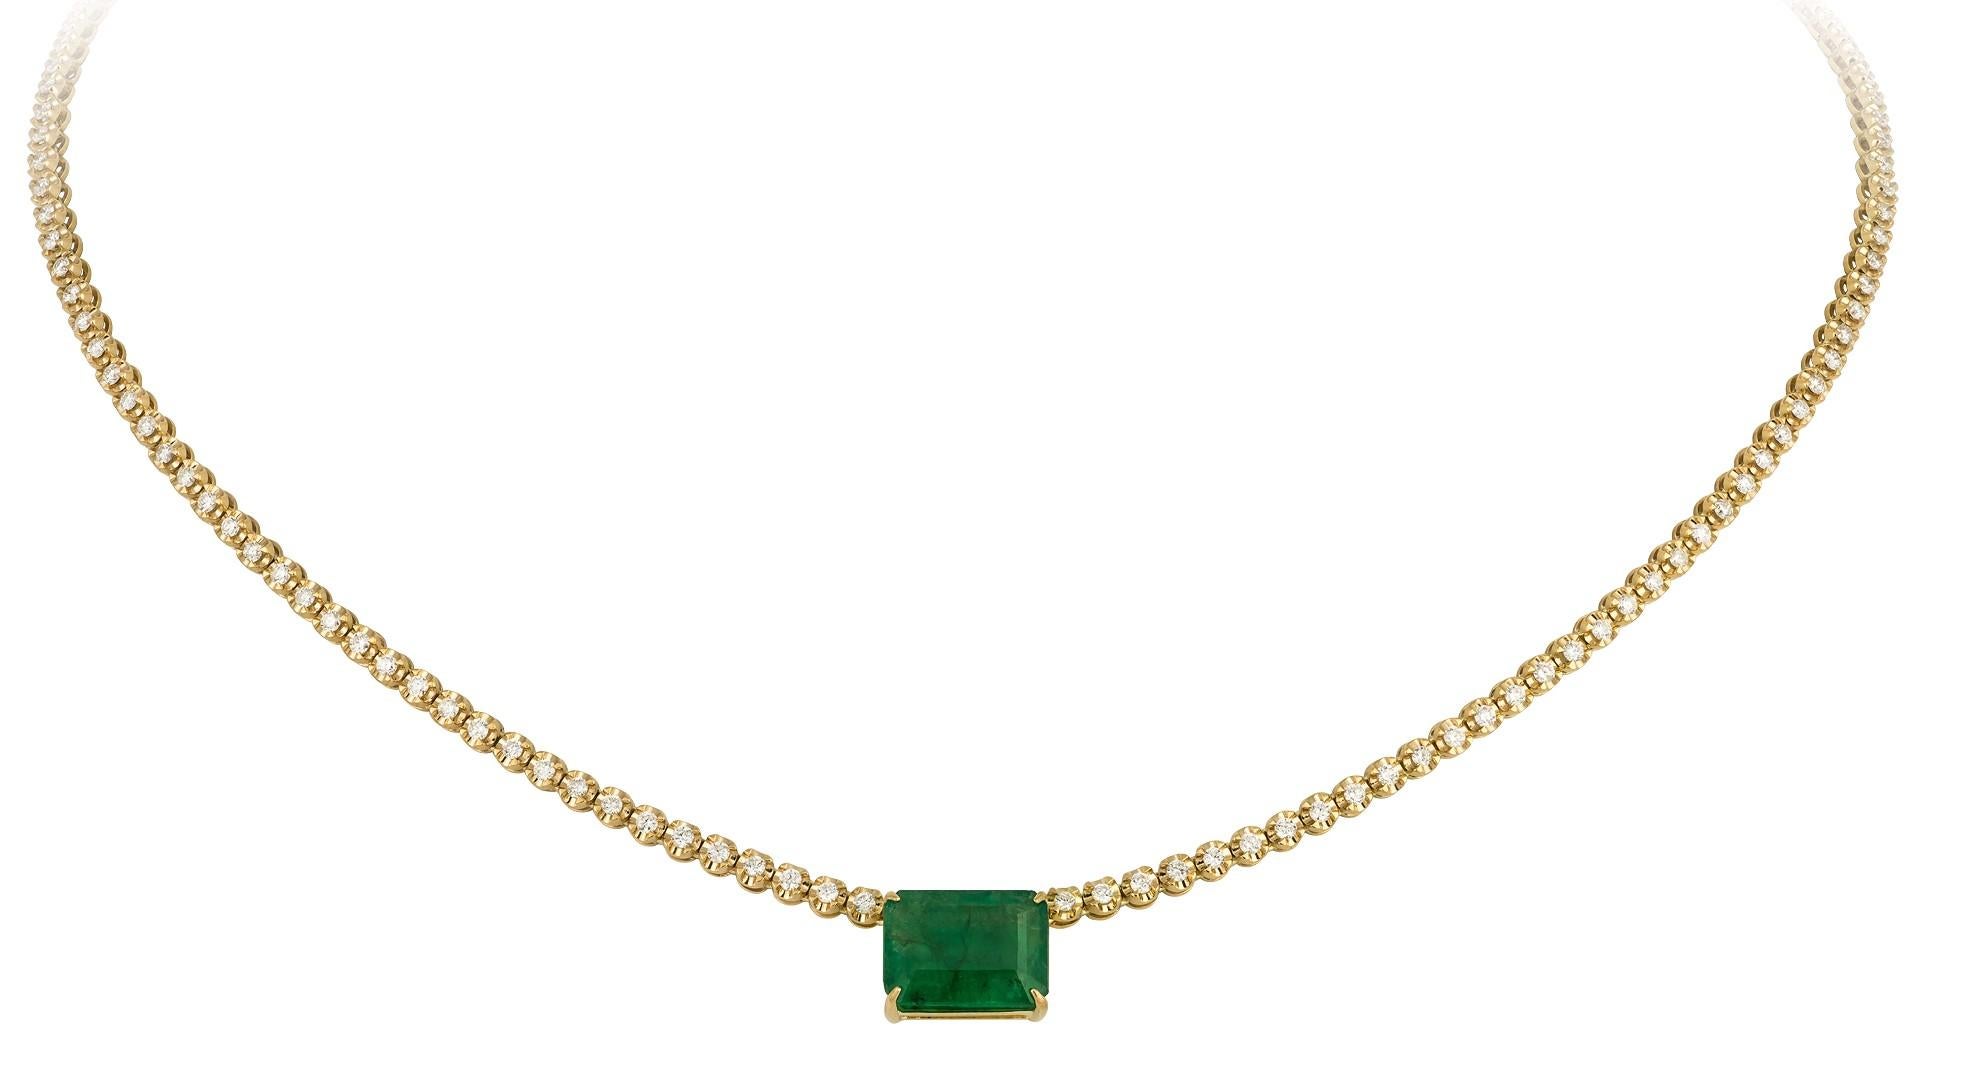 The Following Items we are offering is a Rare 18KT Yellow Gold Round Diamond and Emerald Necklace. Necklace is comprised of Finely Set Gorgeous Glittering Round Diamonds with a Large Gorgeous Green Emerald!!! T.C.W. Approx 5CTS!! The Emerald and